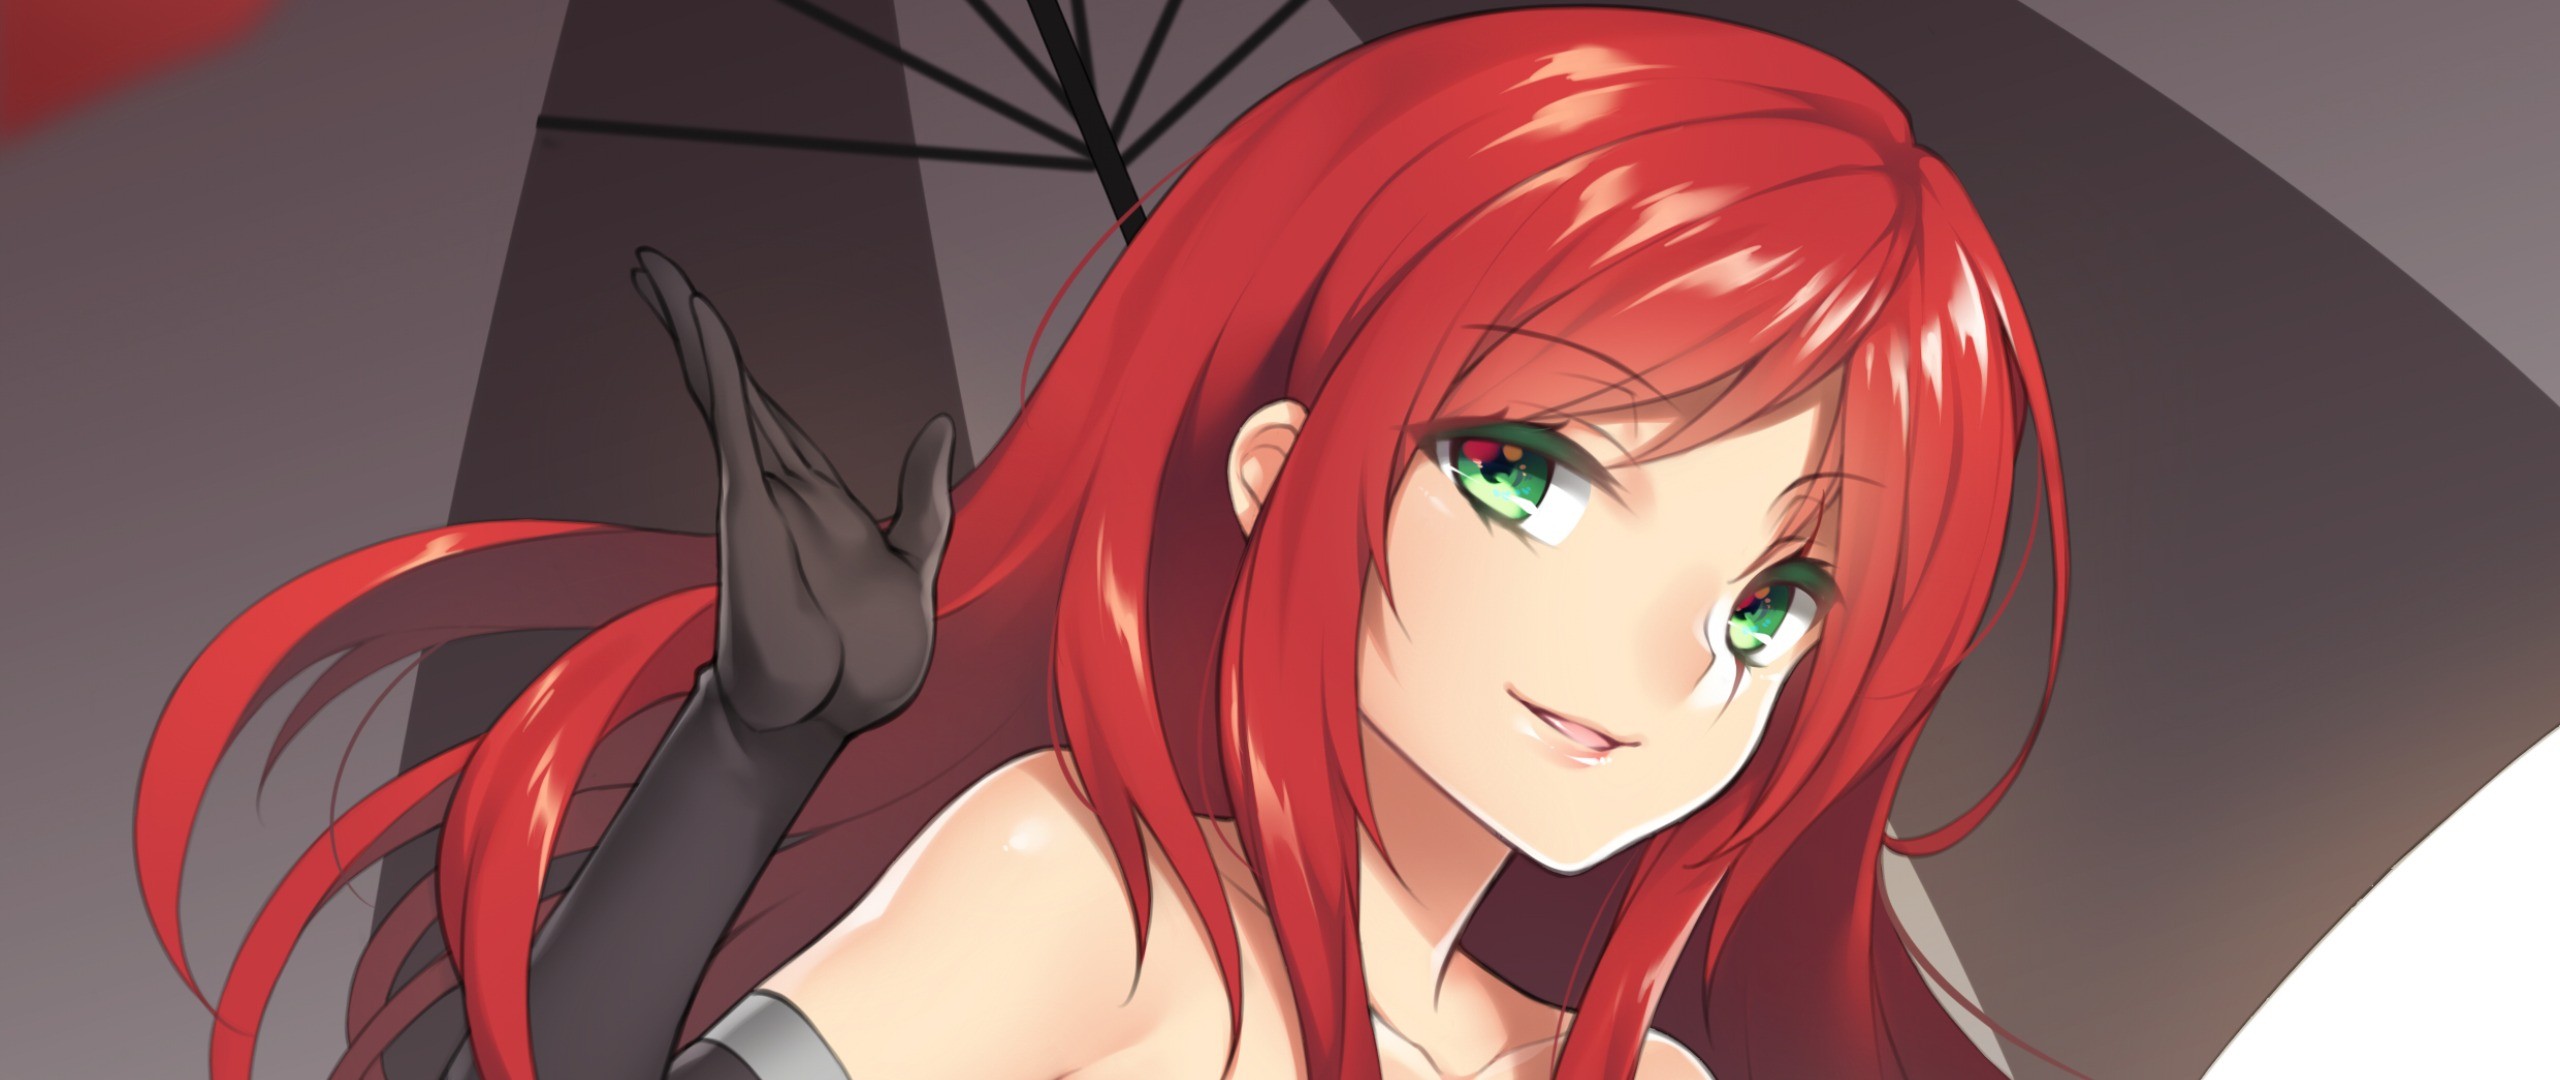 Anime 2560x1080 League of Legends PC gaming redhead green eyes anime girls anime fan art video game art Katarina (League of Legends) video game girls video game characters